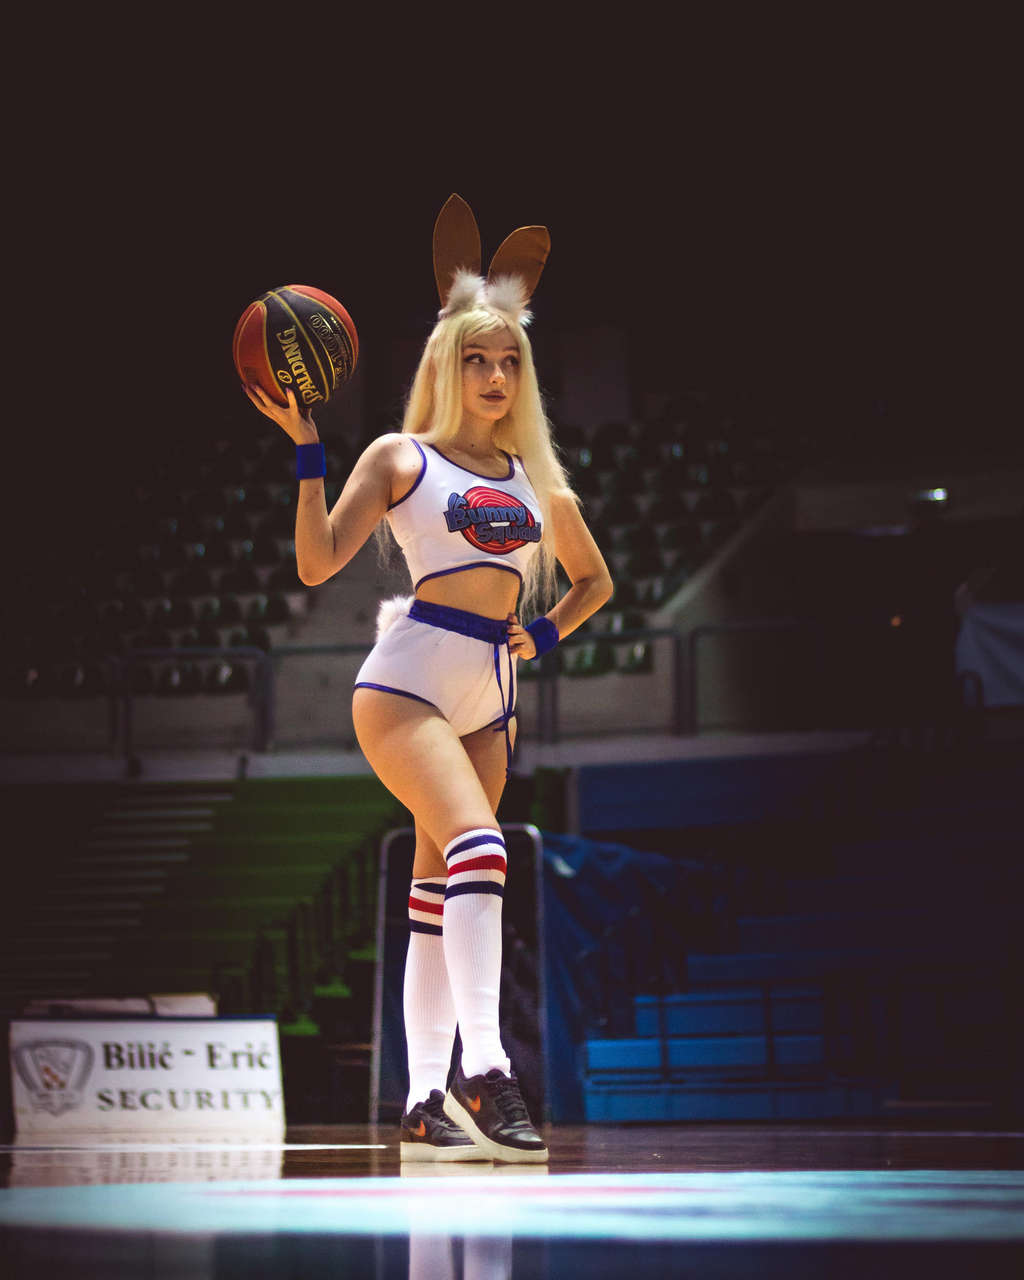 Lola The Bunny From Spacejam By Aryssa614 Firs